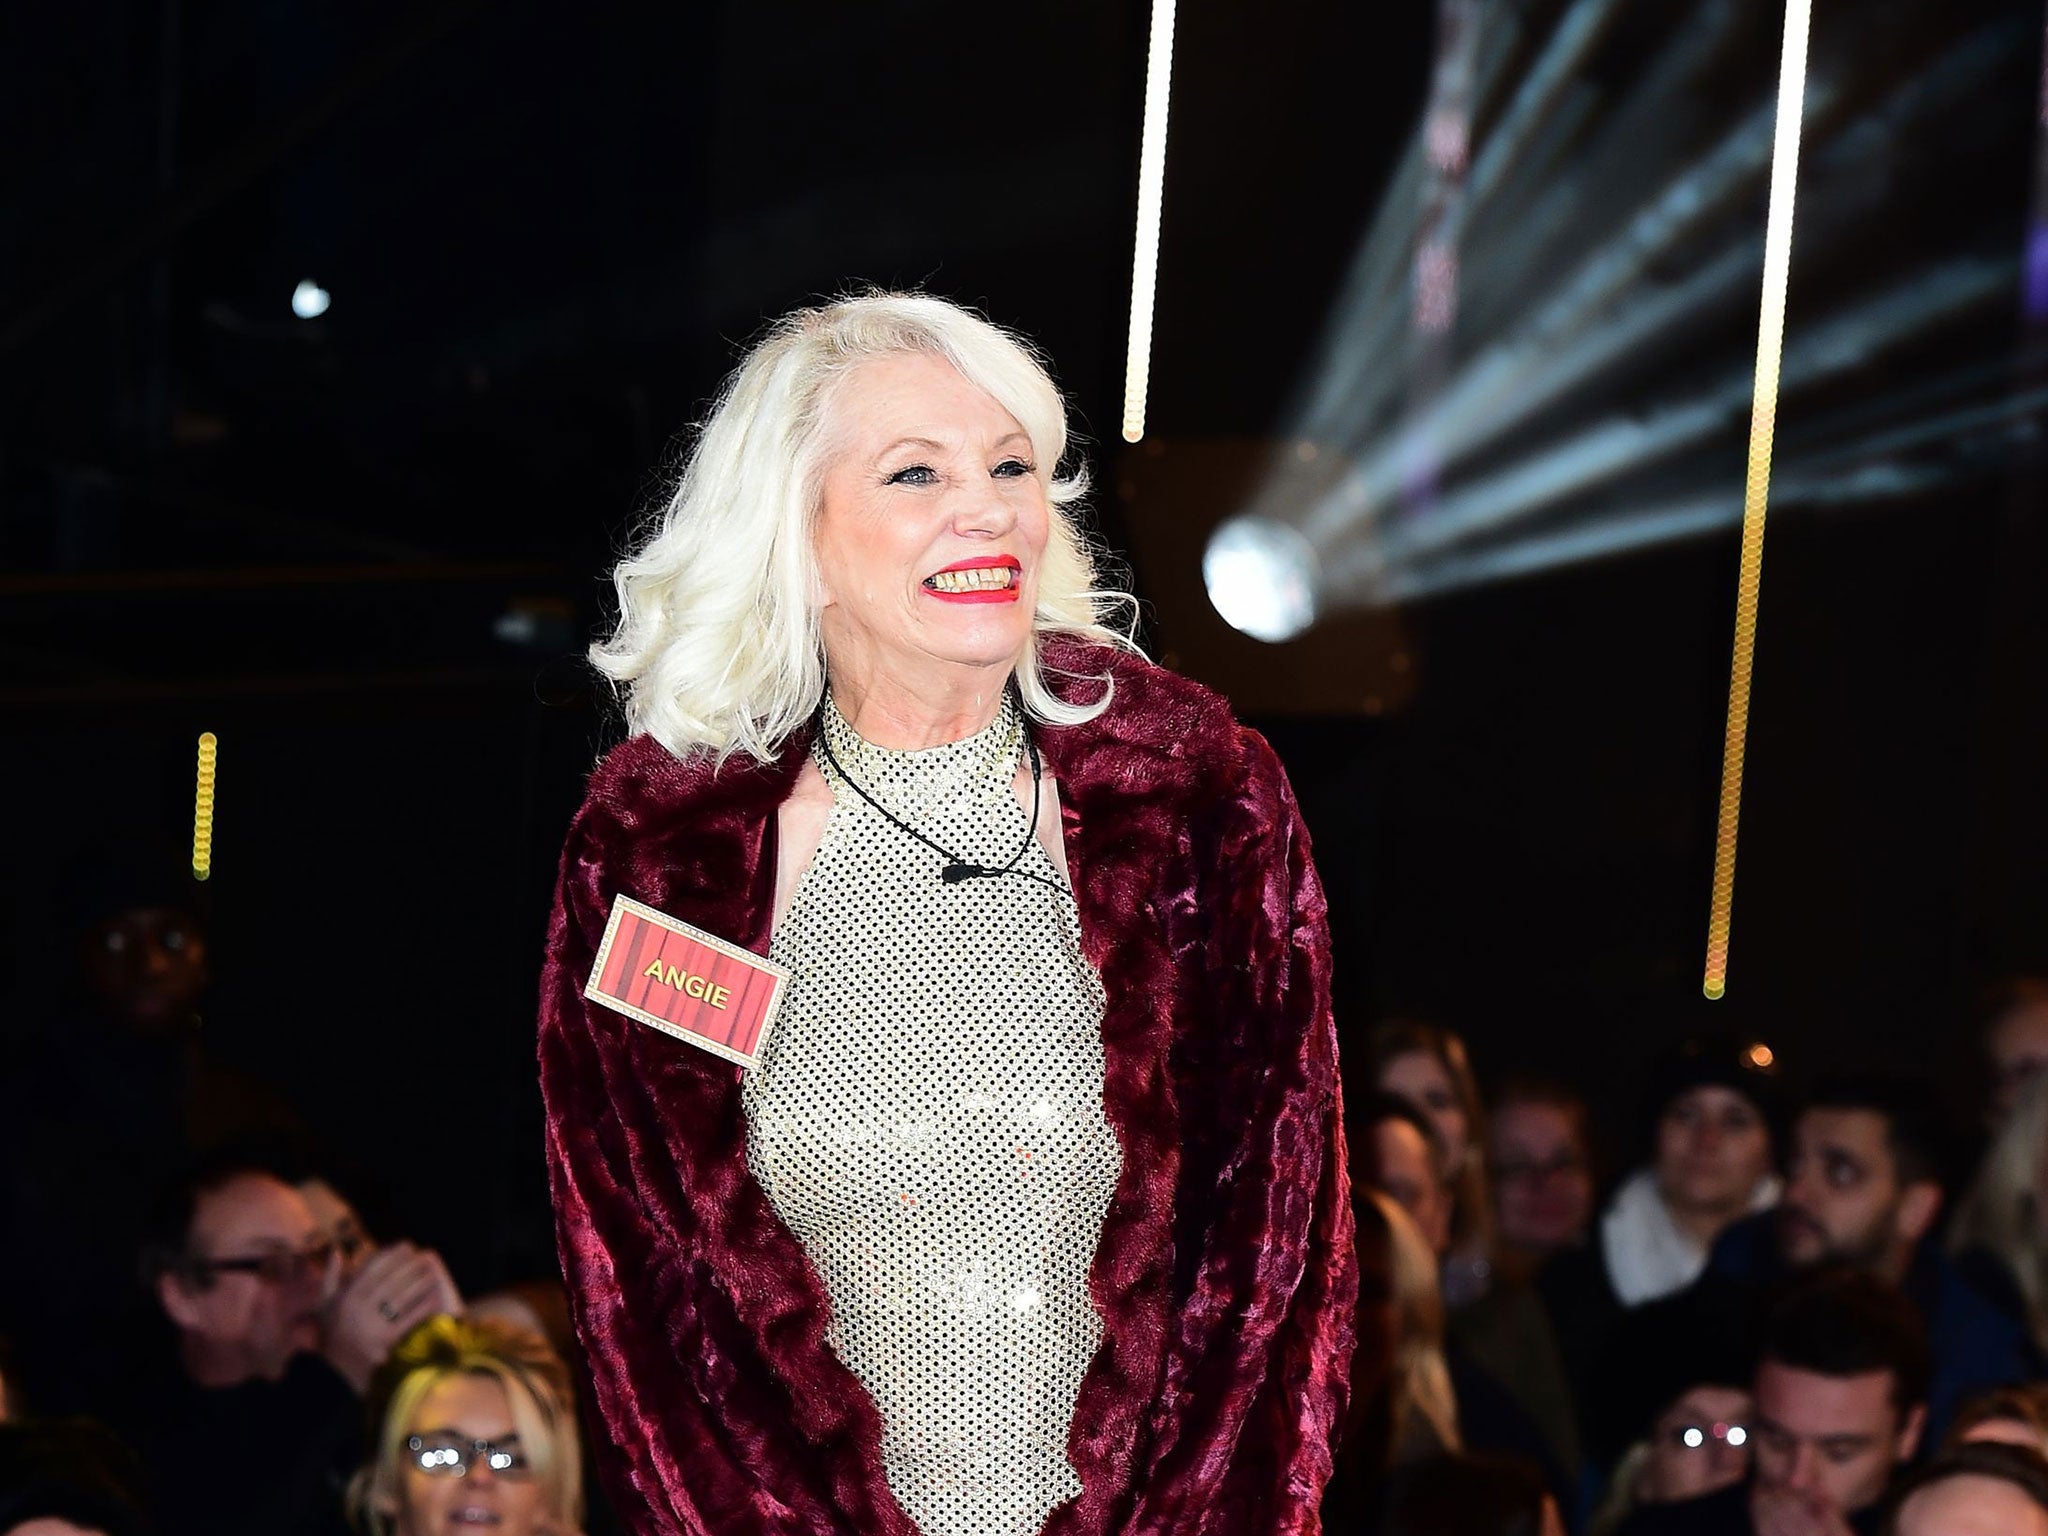 Angie Bowie arrives at the start of the latest series of Celebrity Big Brother, January 5, 2016